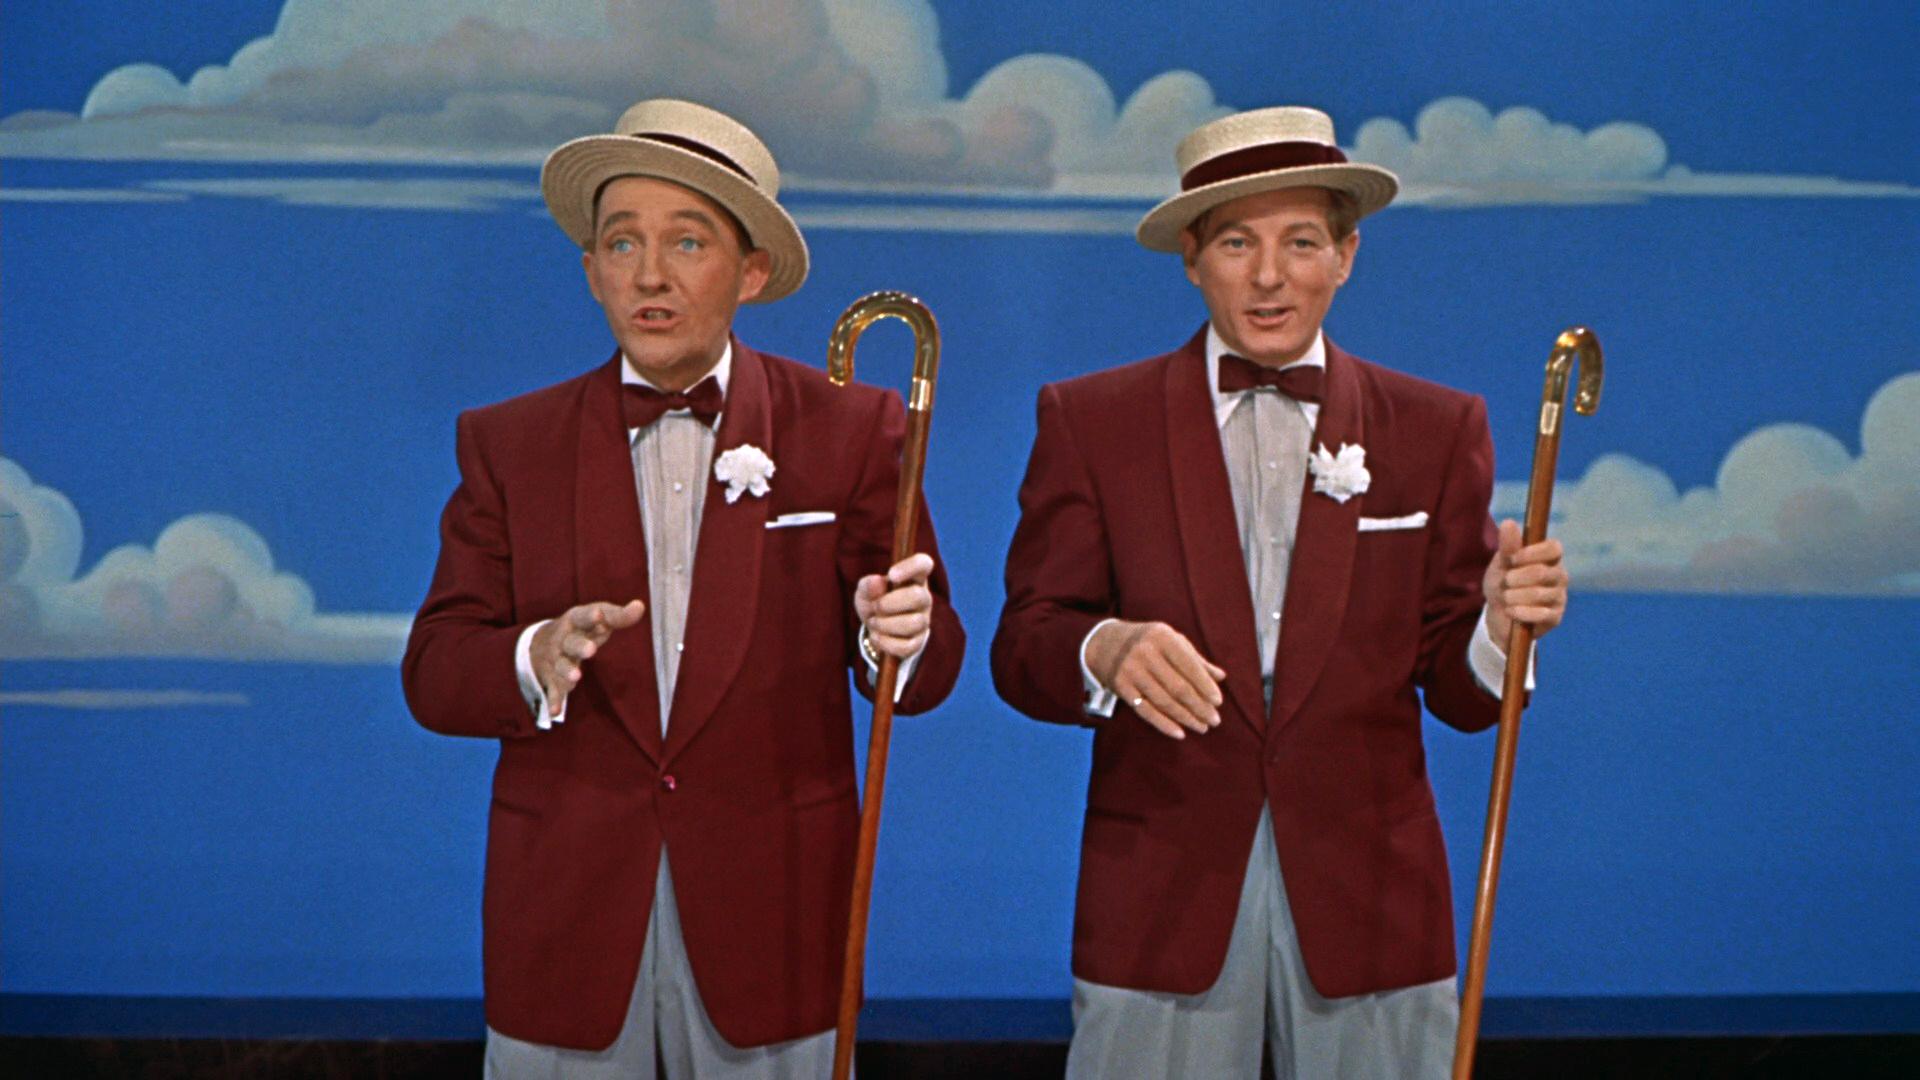 Bing Crosby and Danny Kaye in “White Christmas.” (Wikimedia Commons)